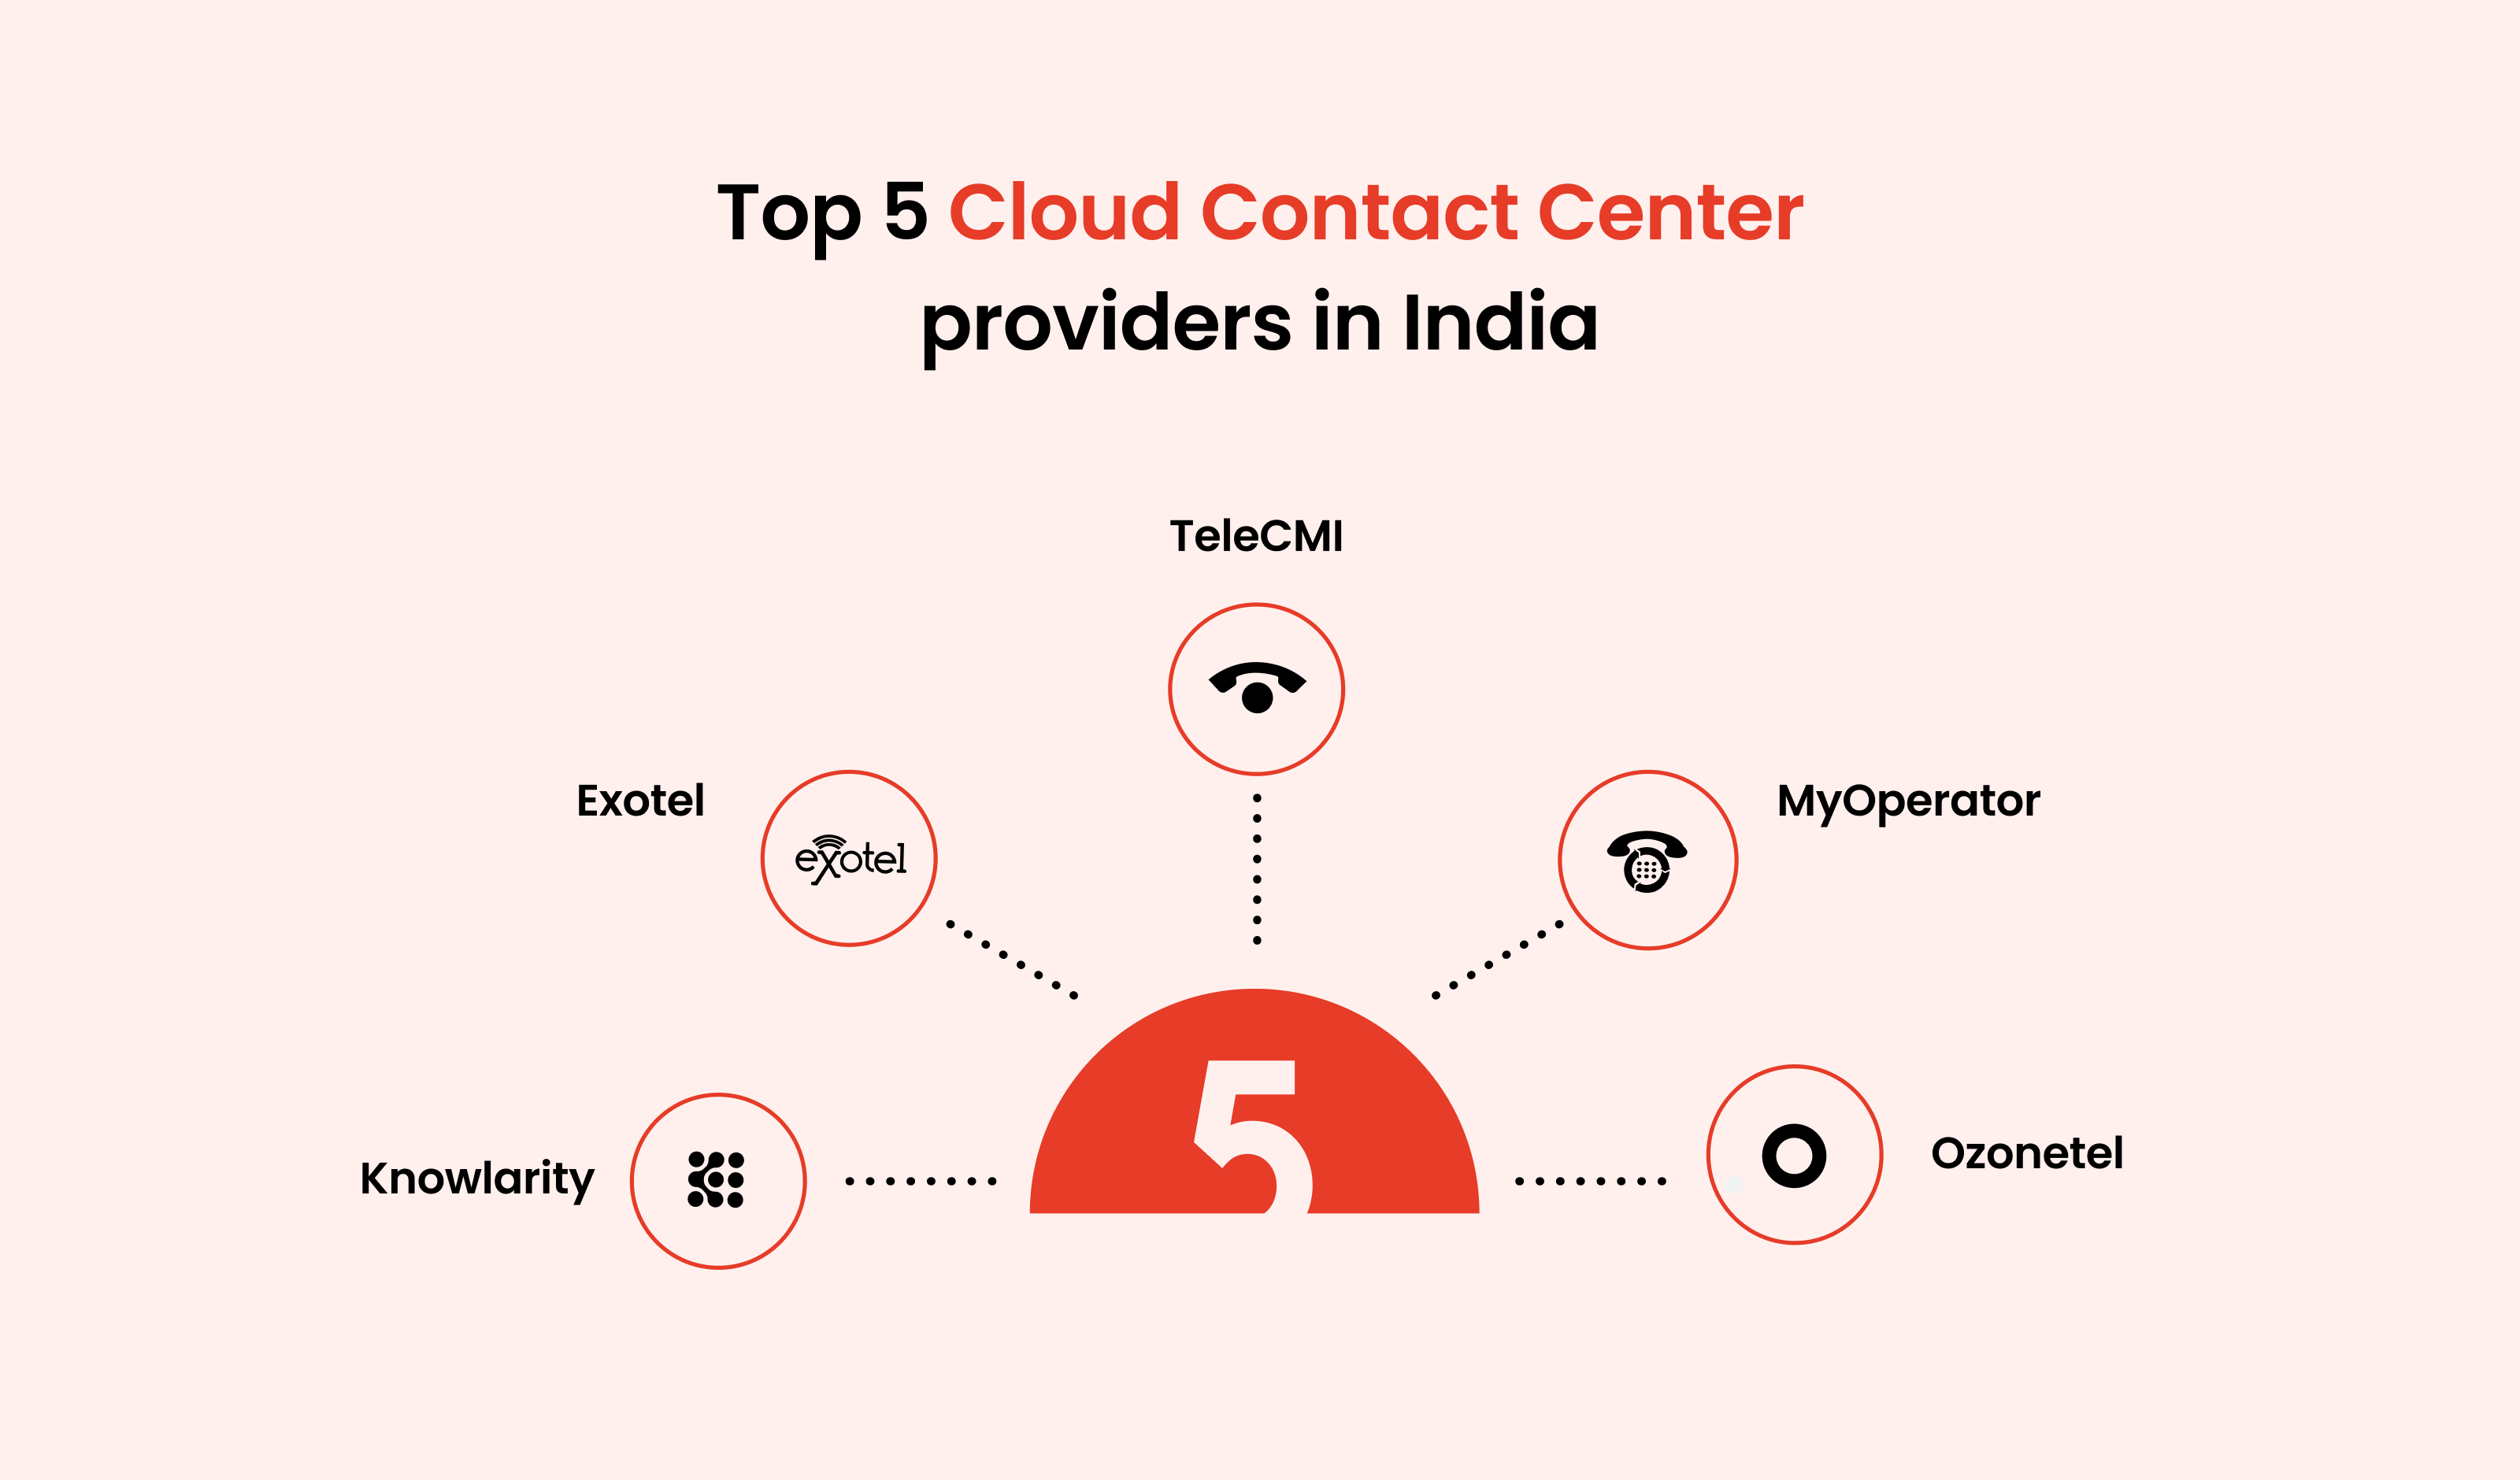 Top 5 Cloud Contact Center Providers in India: